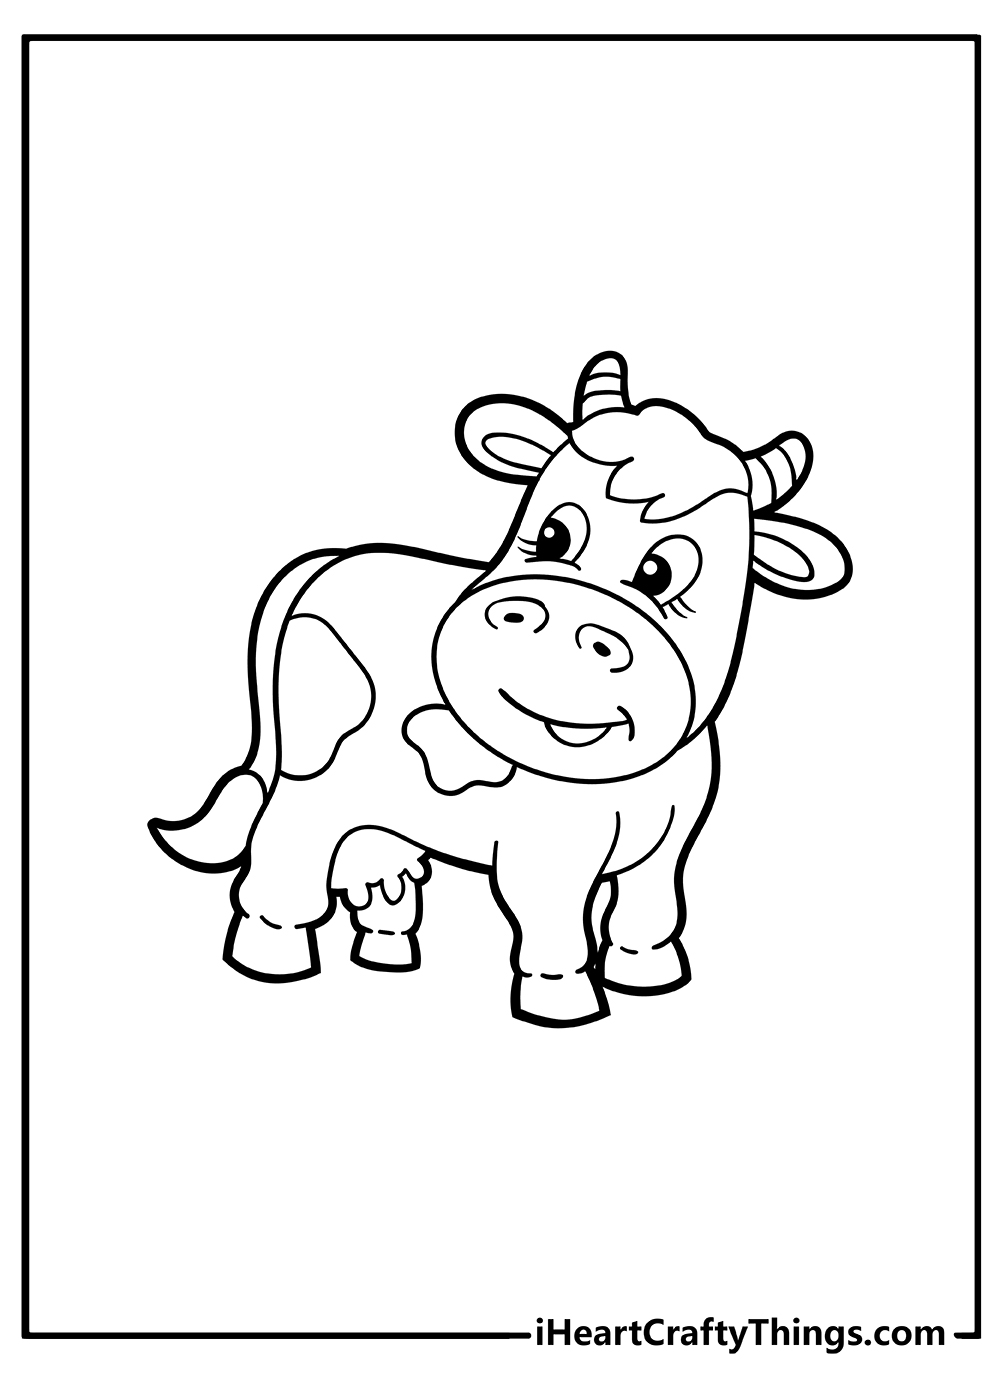 Cow Coloring Pages for toddlers free download